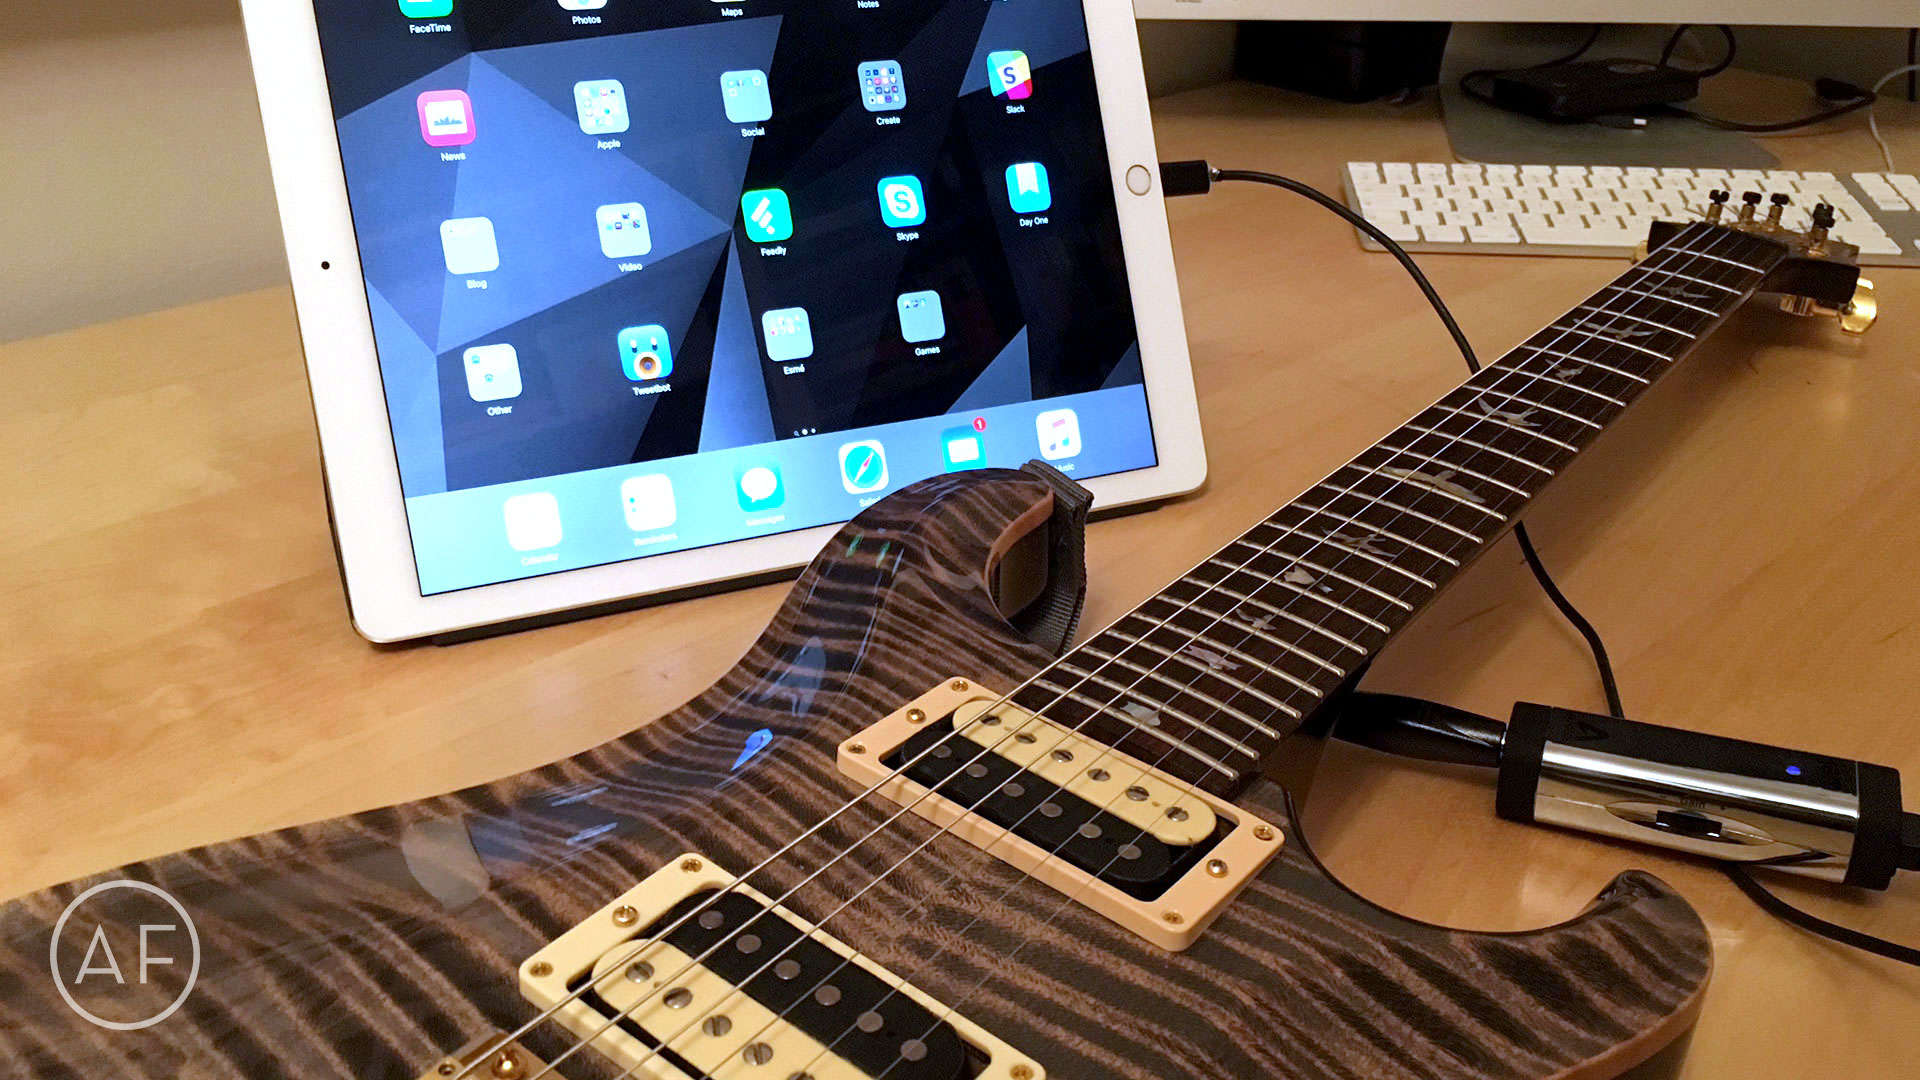 You don't need expensive equipment to record your guitar, an iPhone or iPad will do just fine.